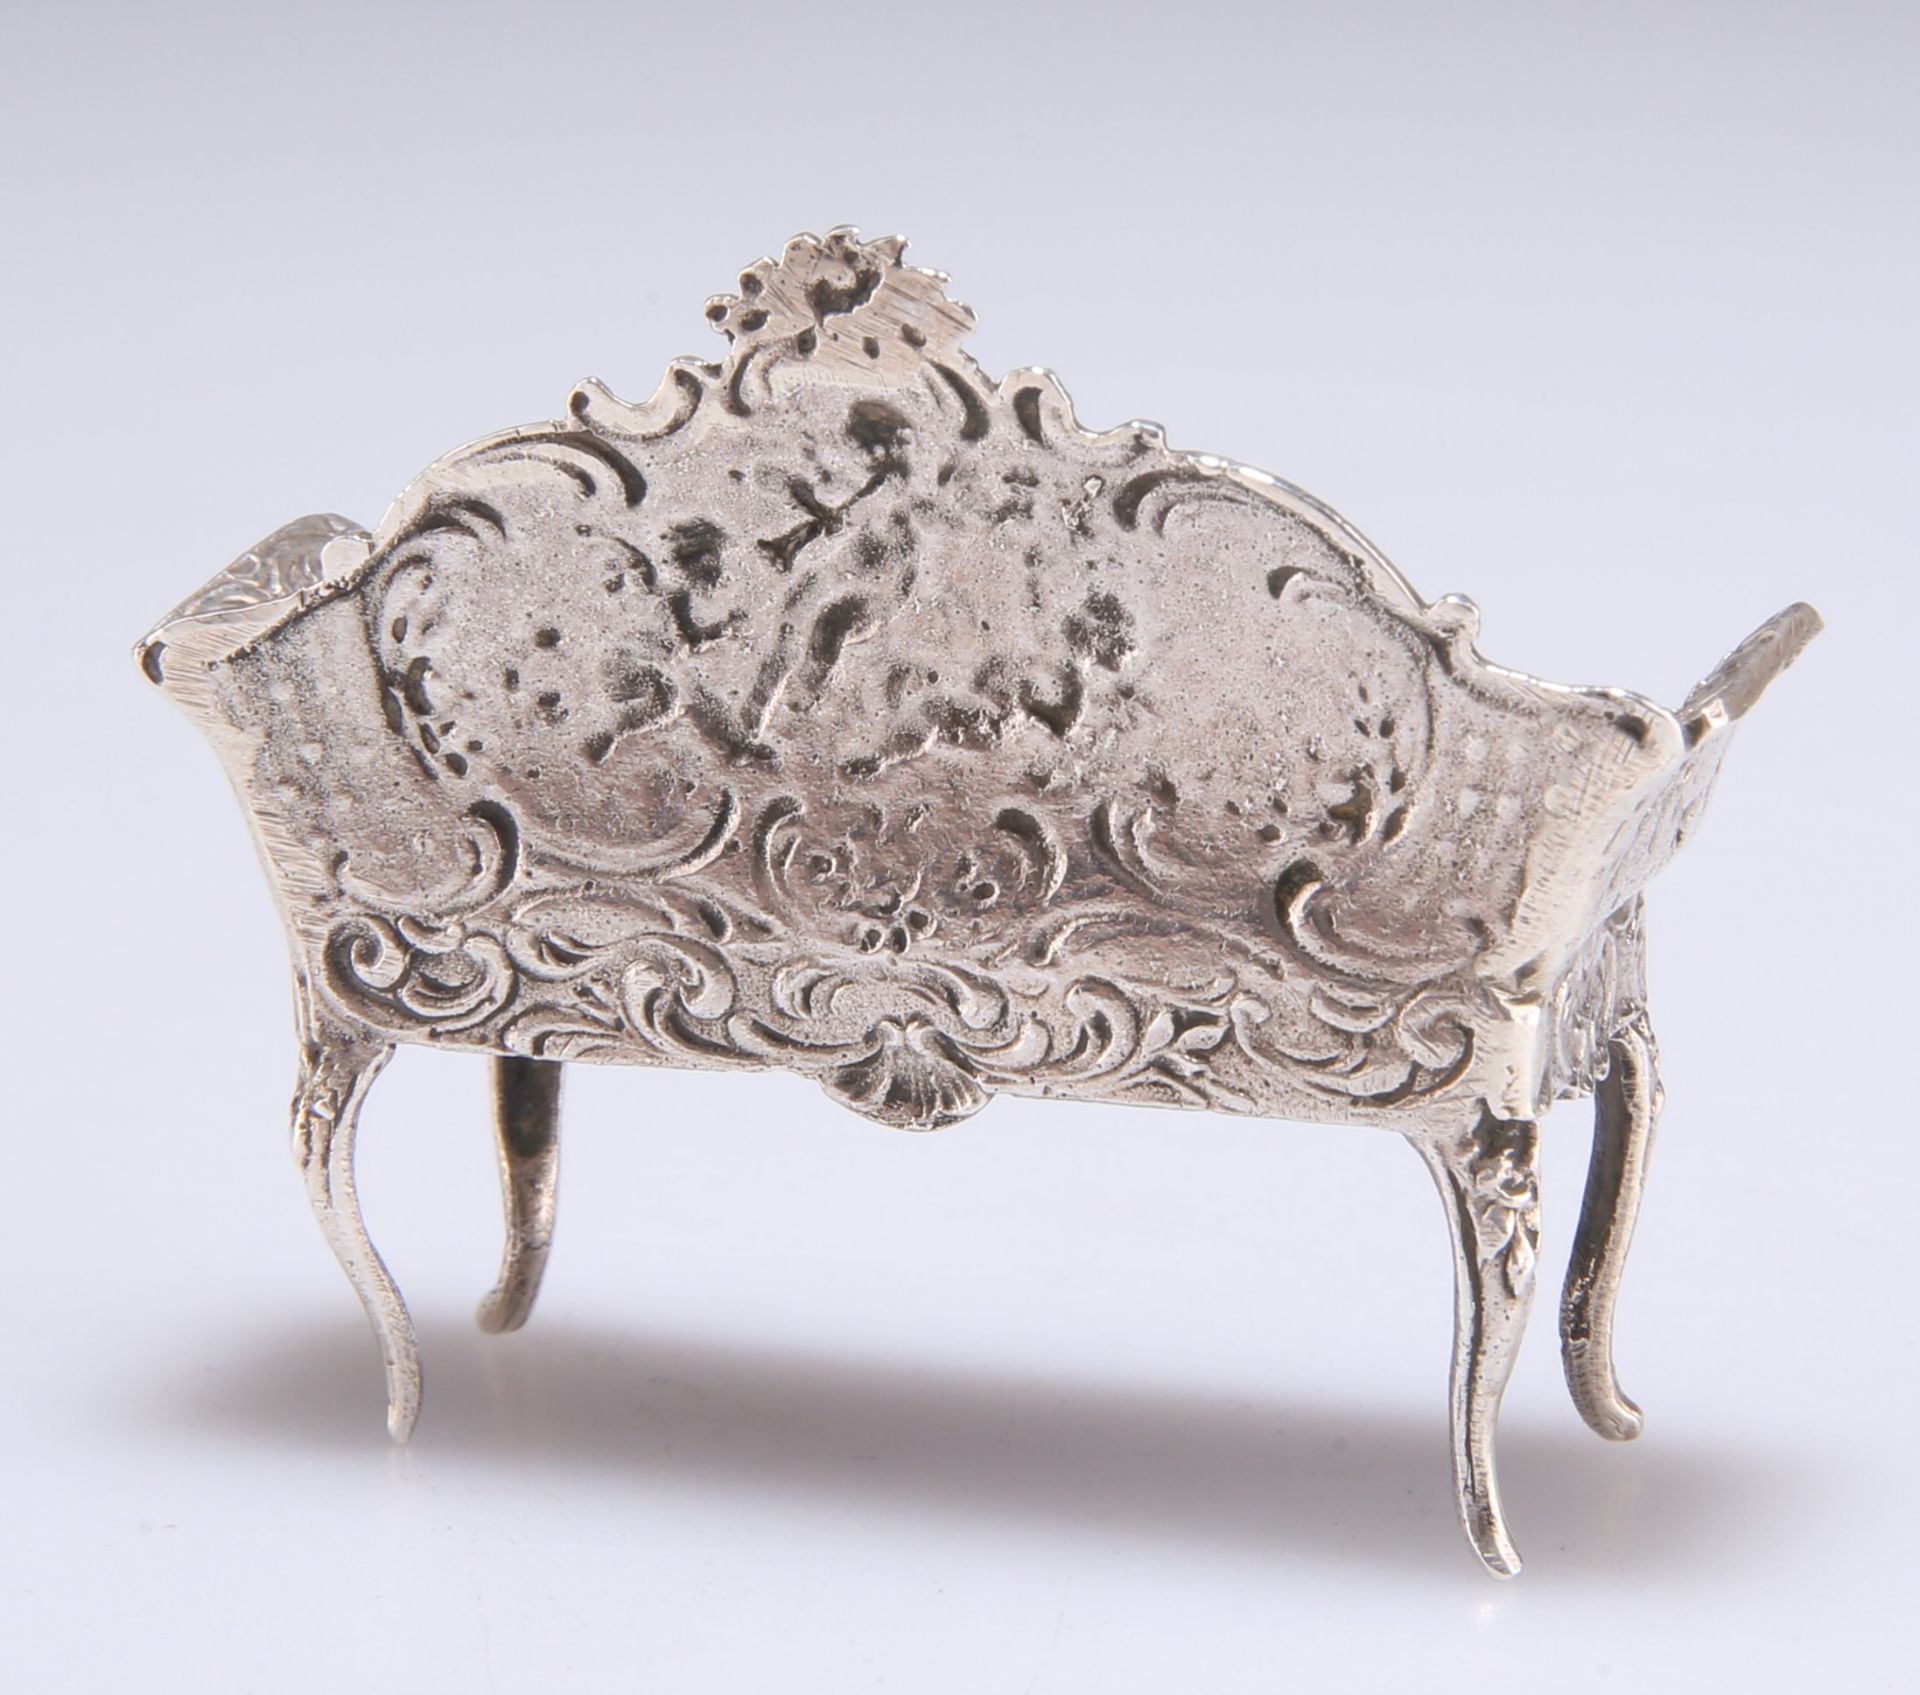 A GERMAN SILVER MINIATURE MODEL OF A SETTEE - Image 2 of 3